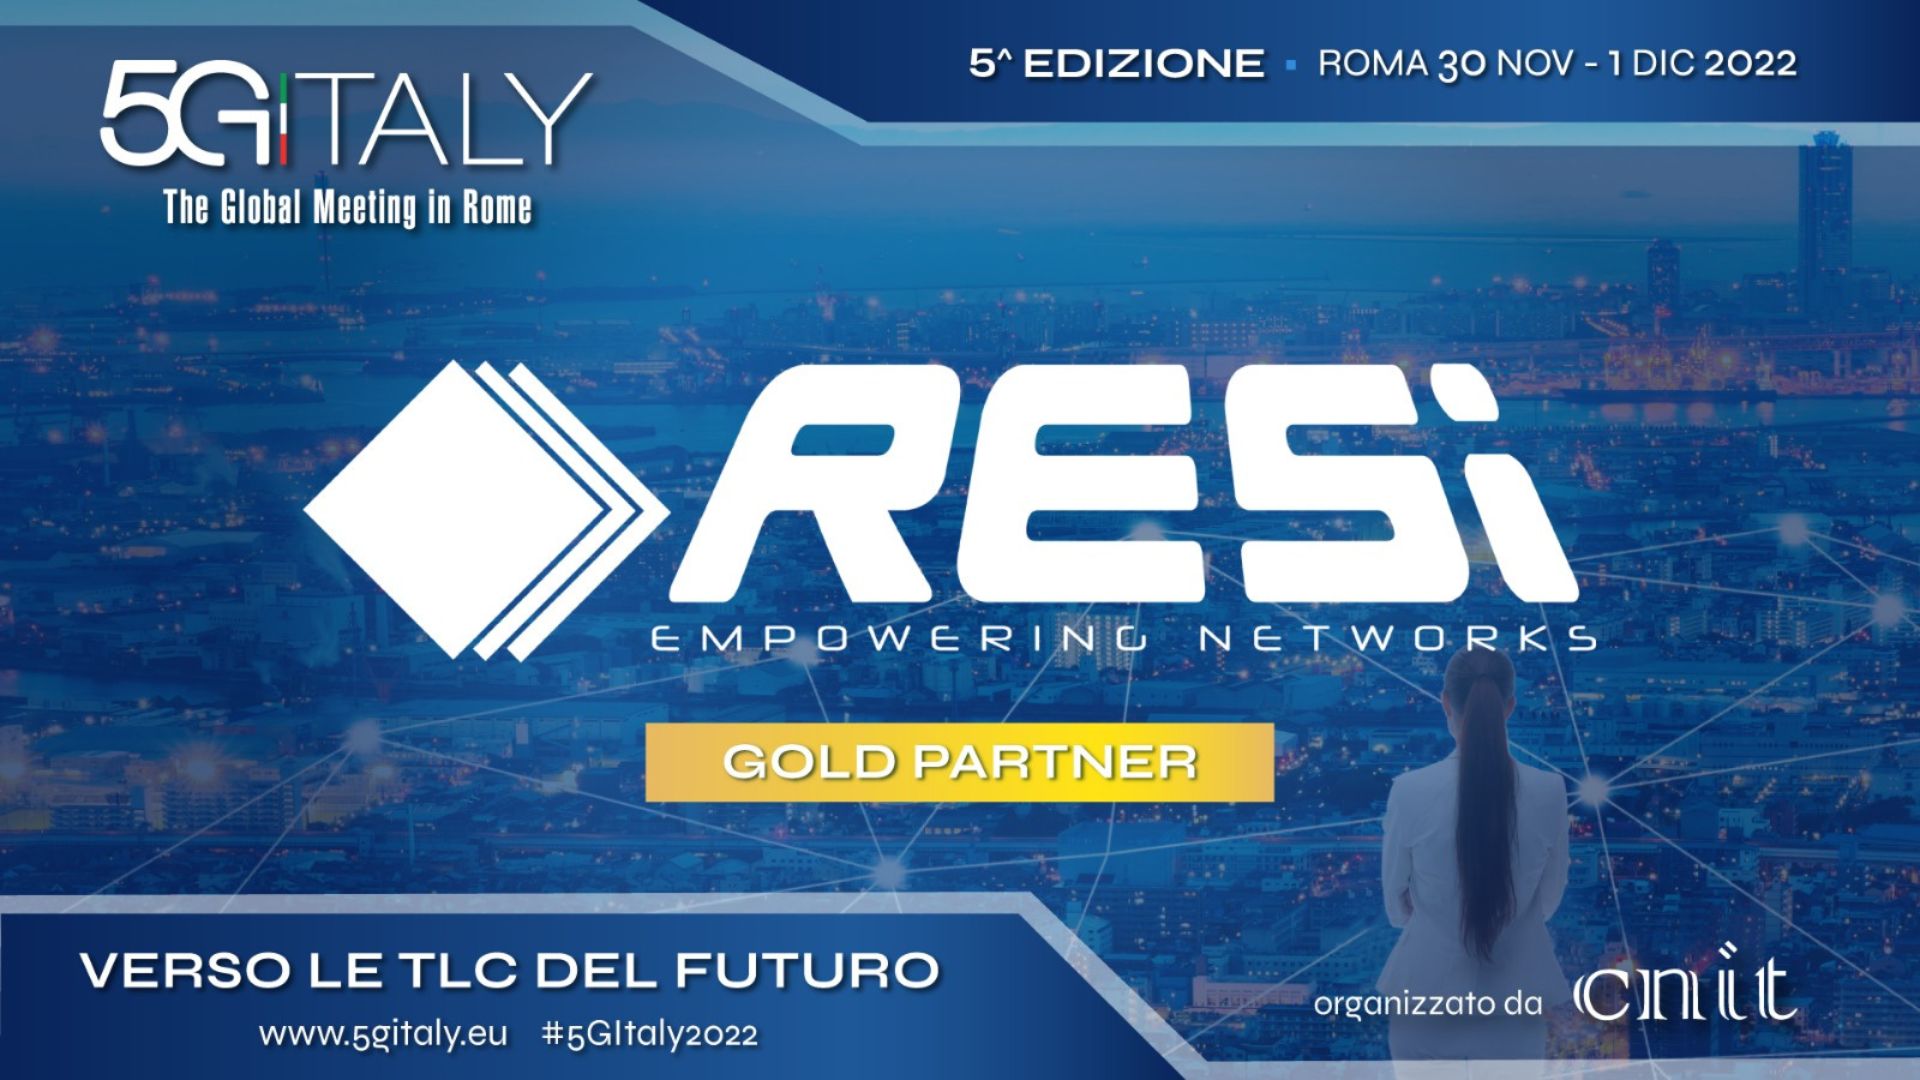 5G Italy - The Global Meeting in Rome